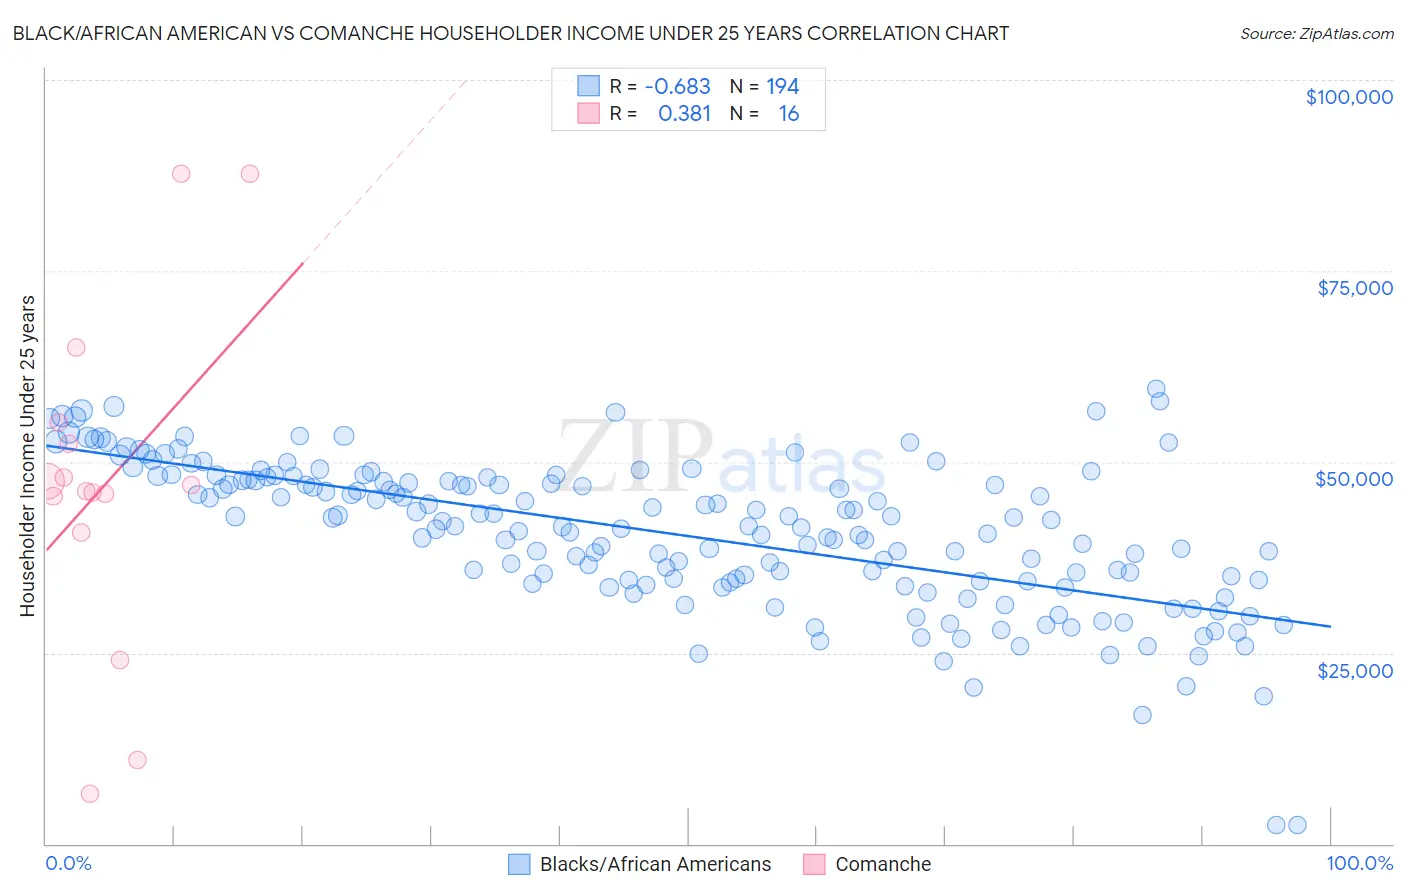 Black/African American vs Comanche Householder Income Under 25 years